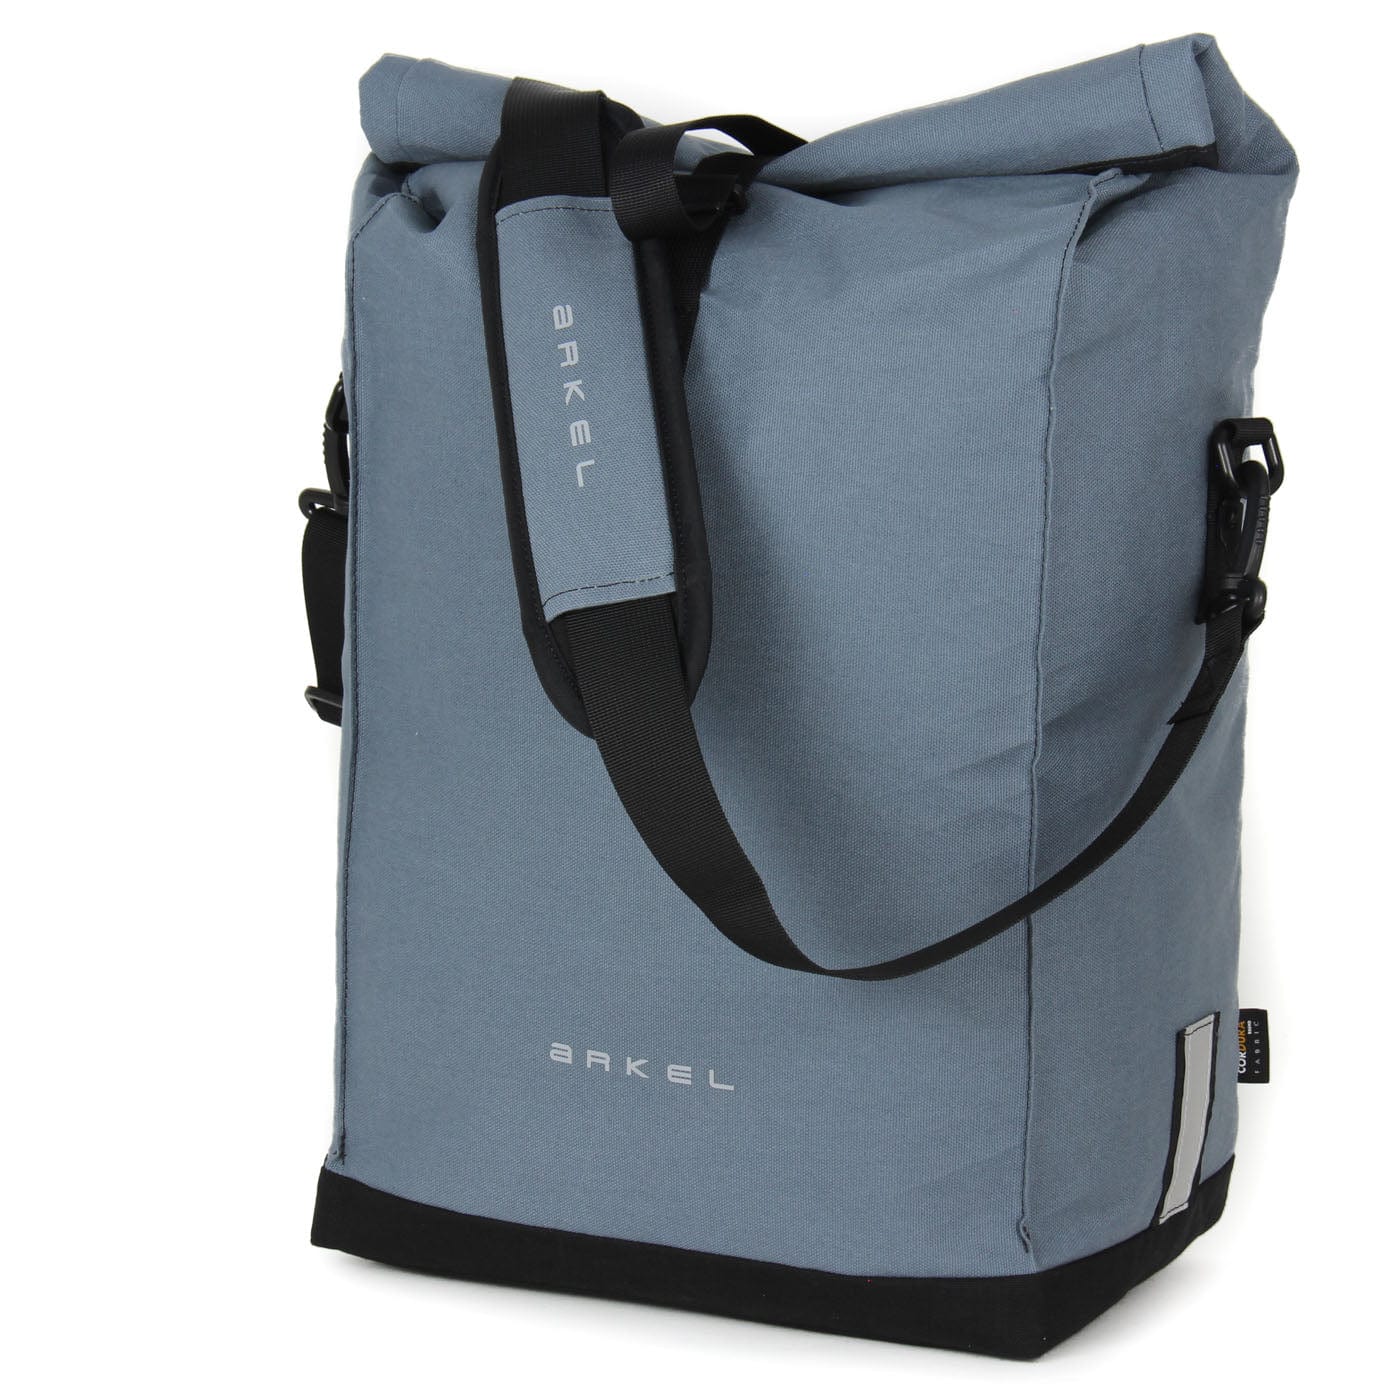 Signature V waterproof urban laptop pannier in Xpac X11 storm grey color with shoulder strap for off the bike transport